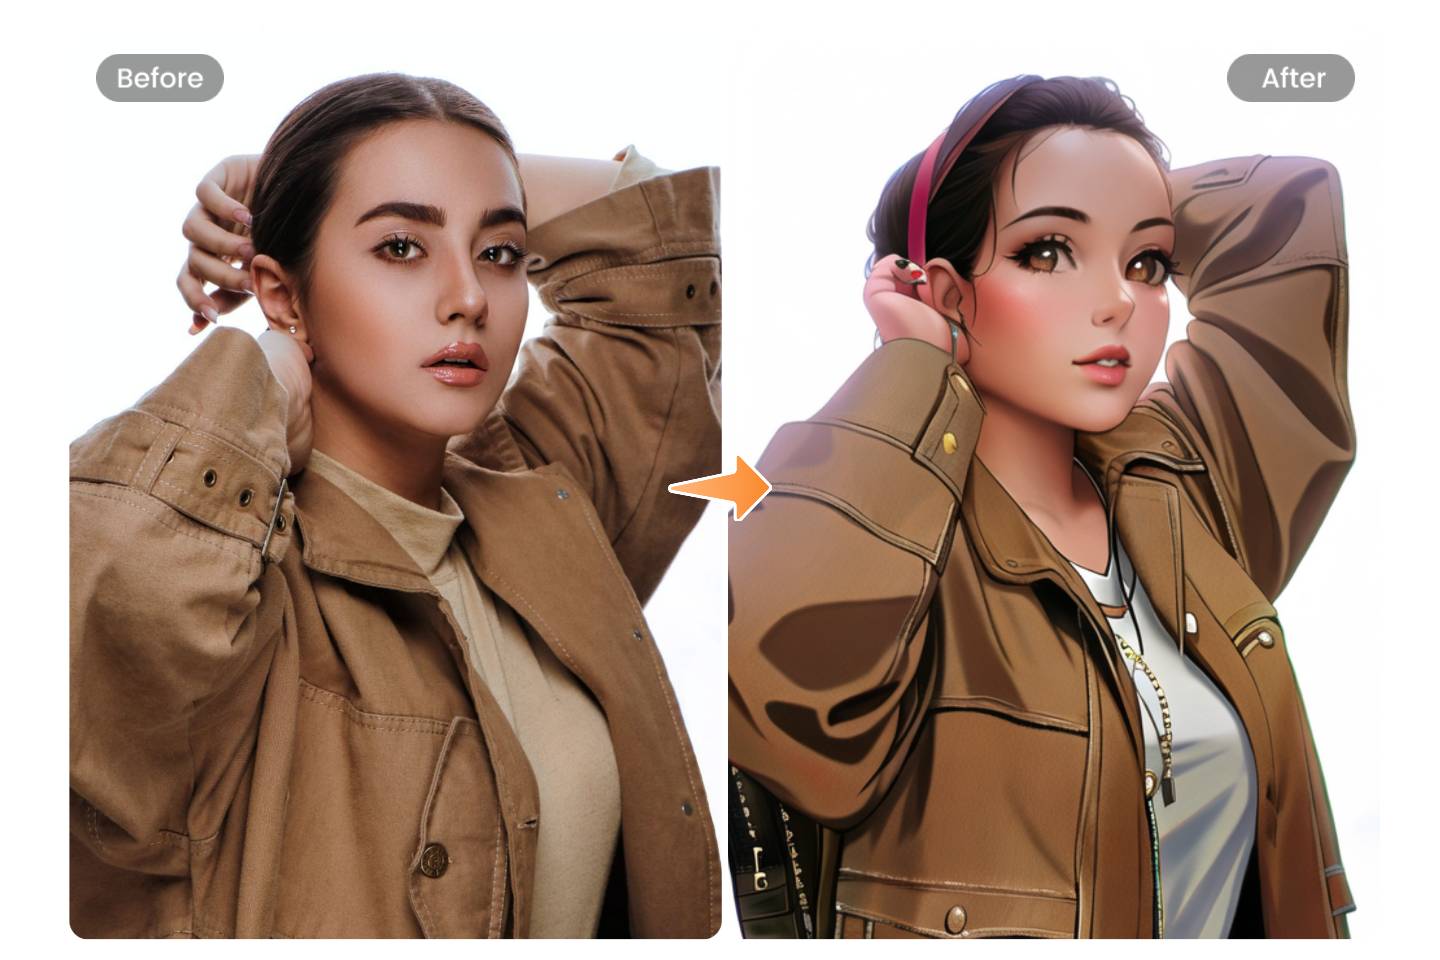 apply the anime filter for the female wearing a dark brown coat